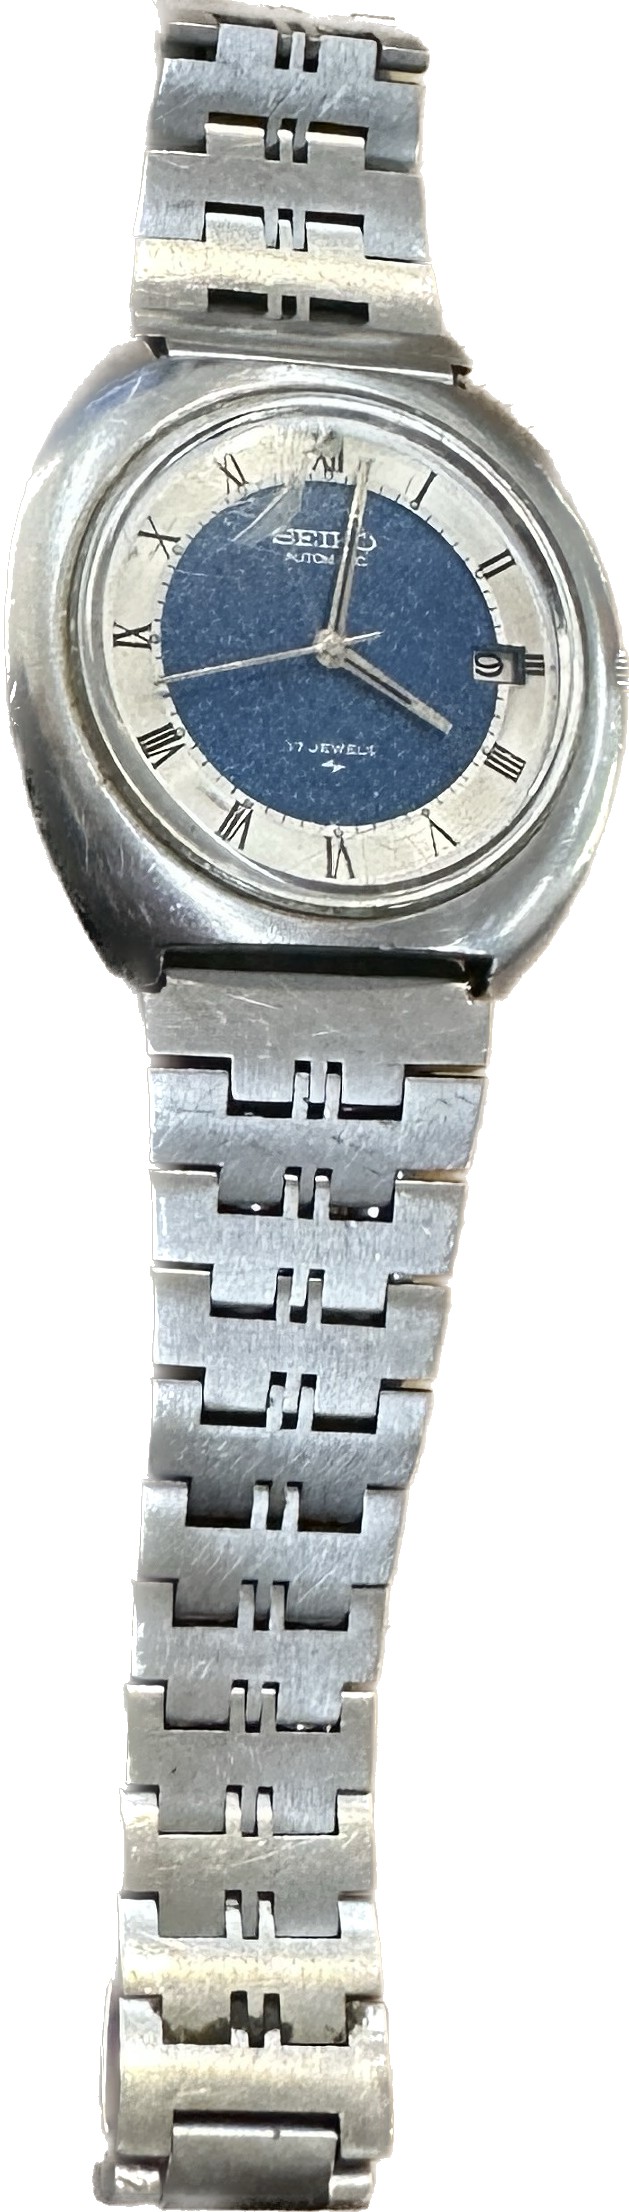 Gents Seiko wrist watch - no warranty given, in need of a new bezel - Image 5 of 5